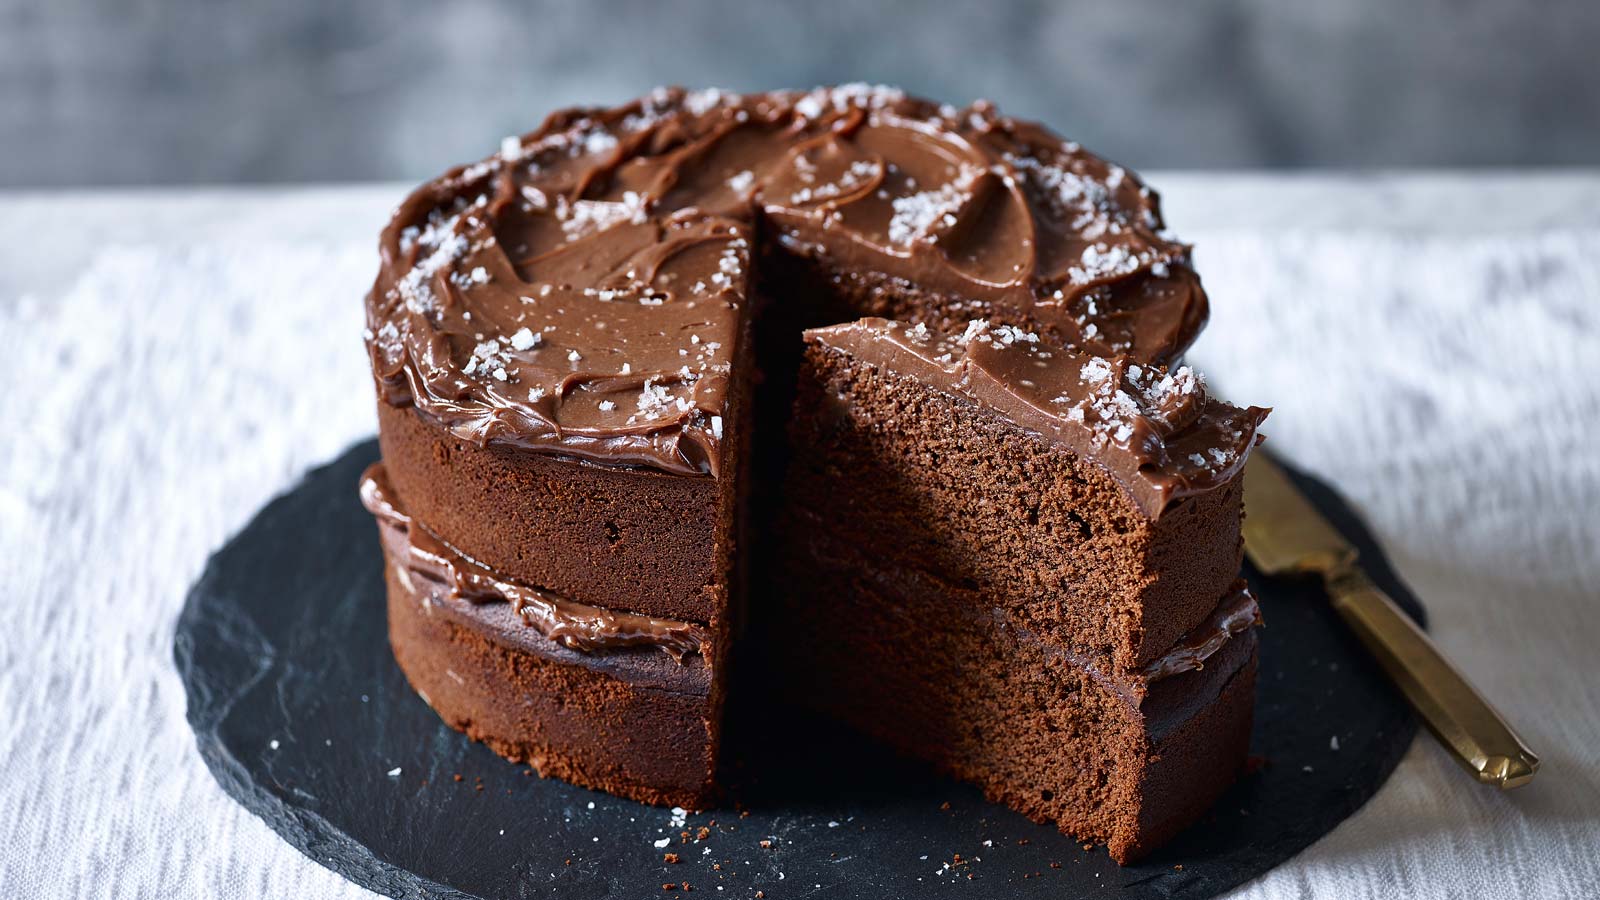 🍪 Only a True Chocoholic Will Have Eaten at Least 13/25 of These Treats Chocolate Cake